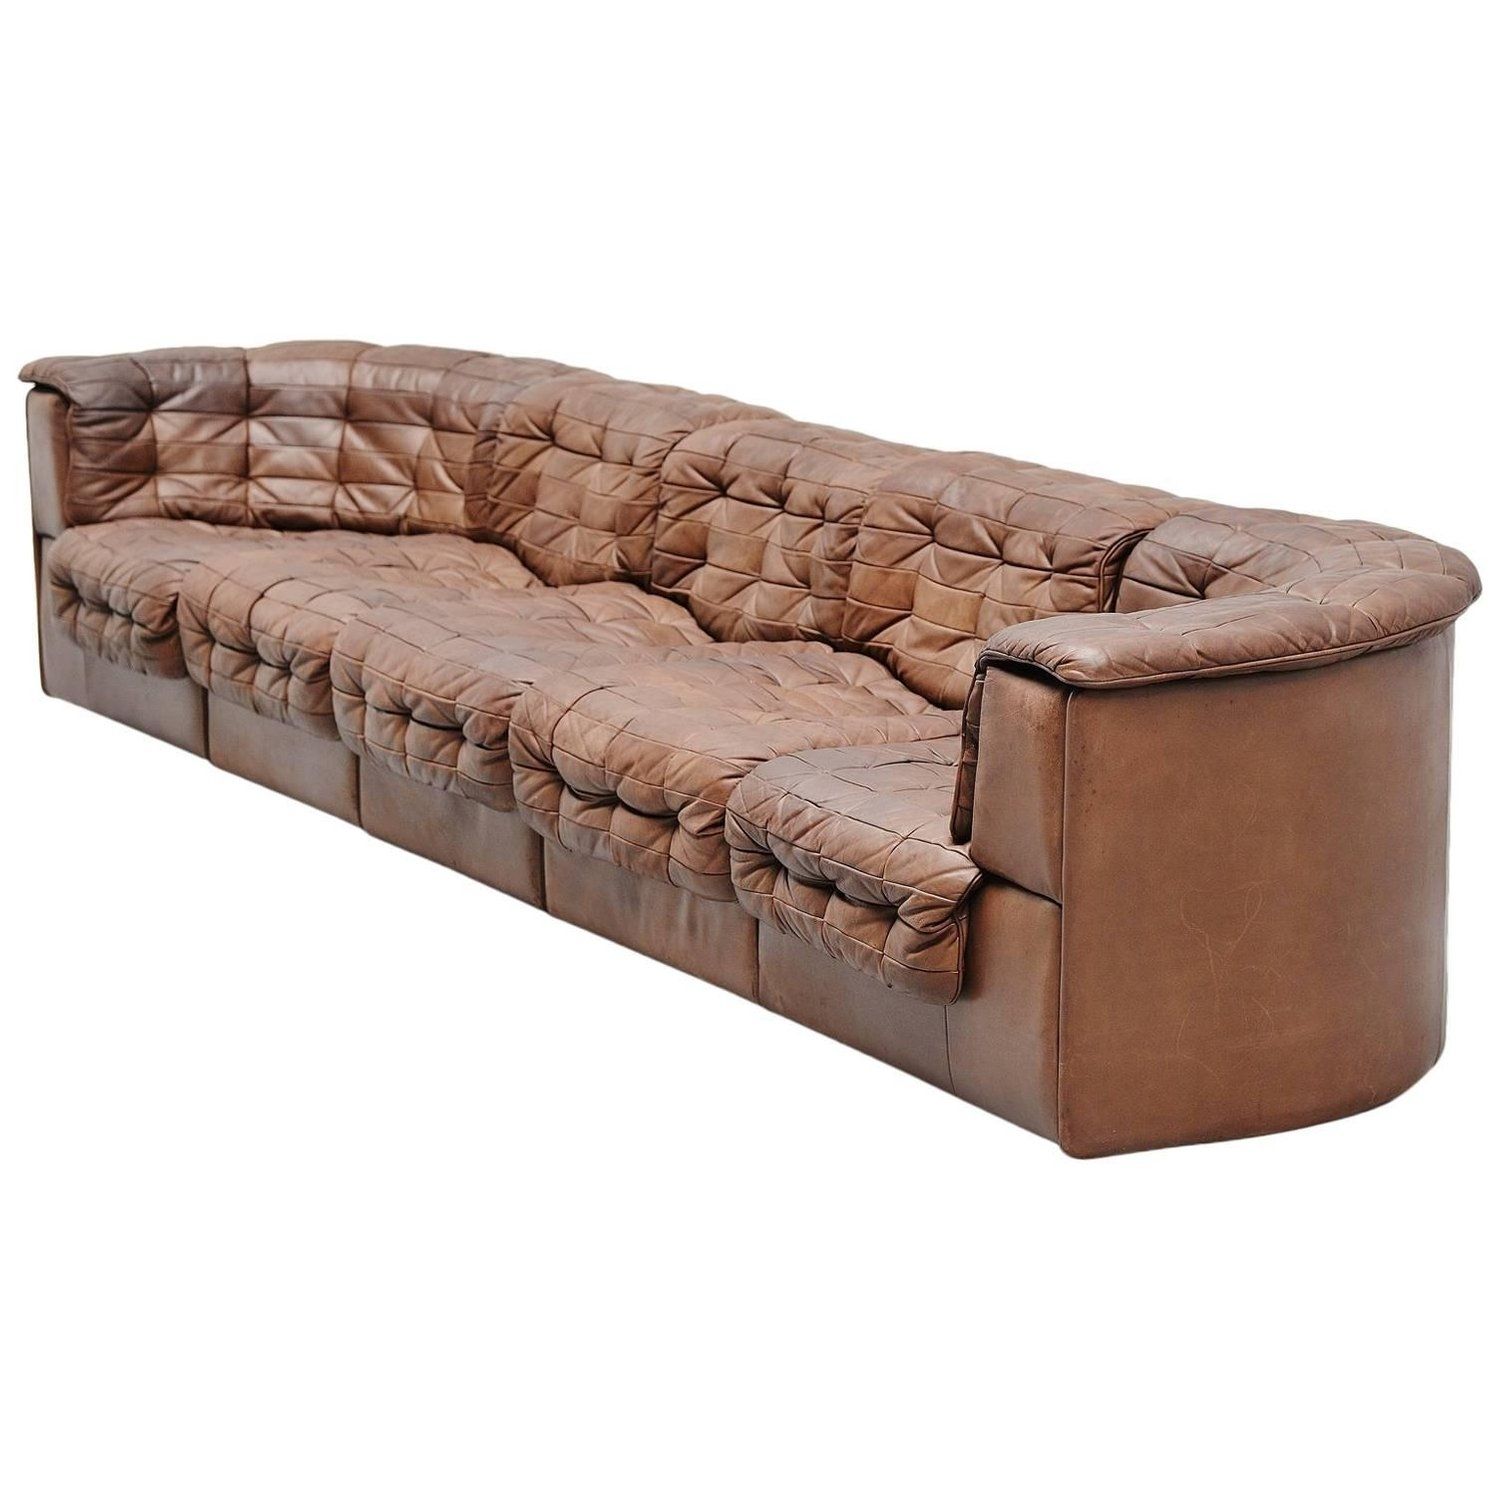 Sectional Couches Buffalo Ny | Reference Of Sofa And Couch Pertaining To Sectional Sofas At Buffalo Ny (View 8 of 10)